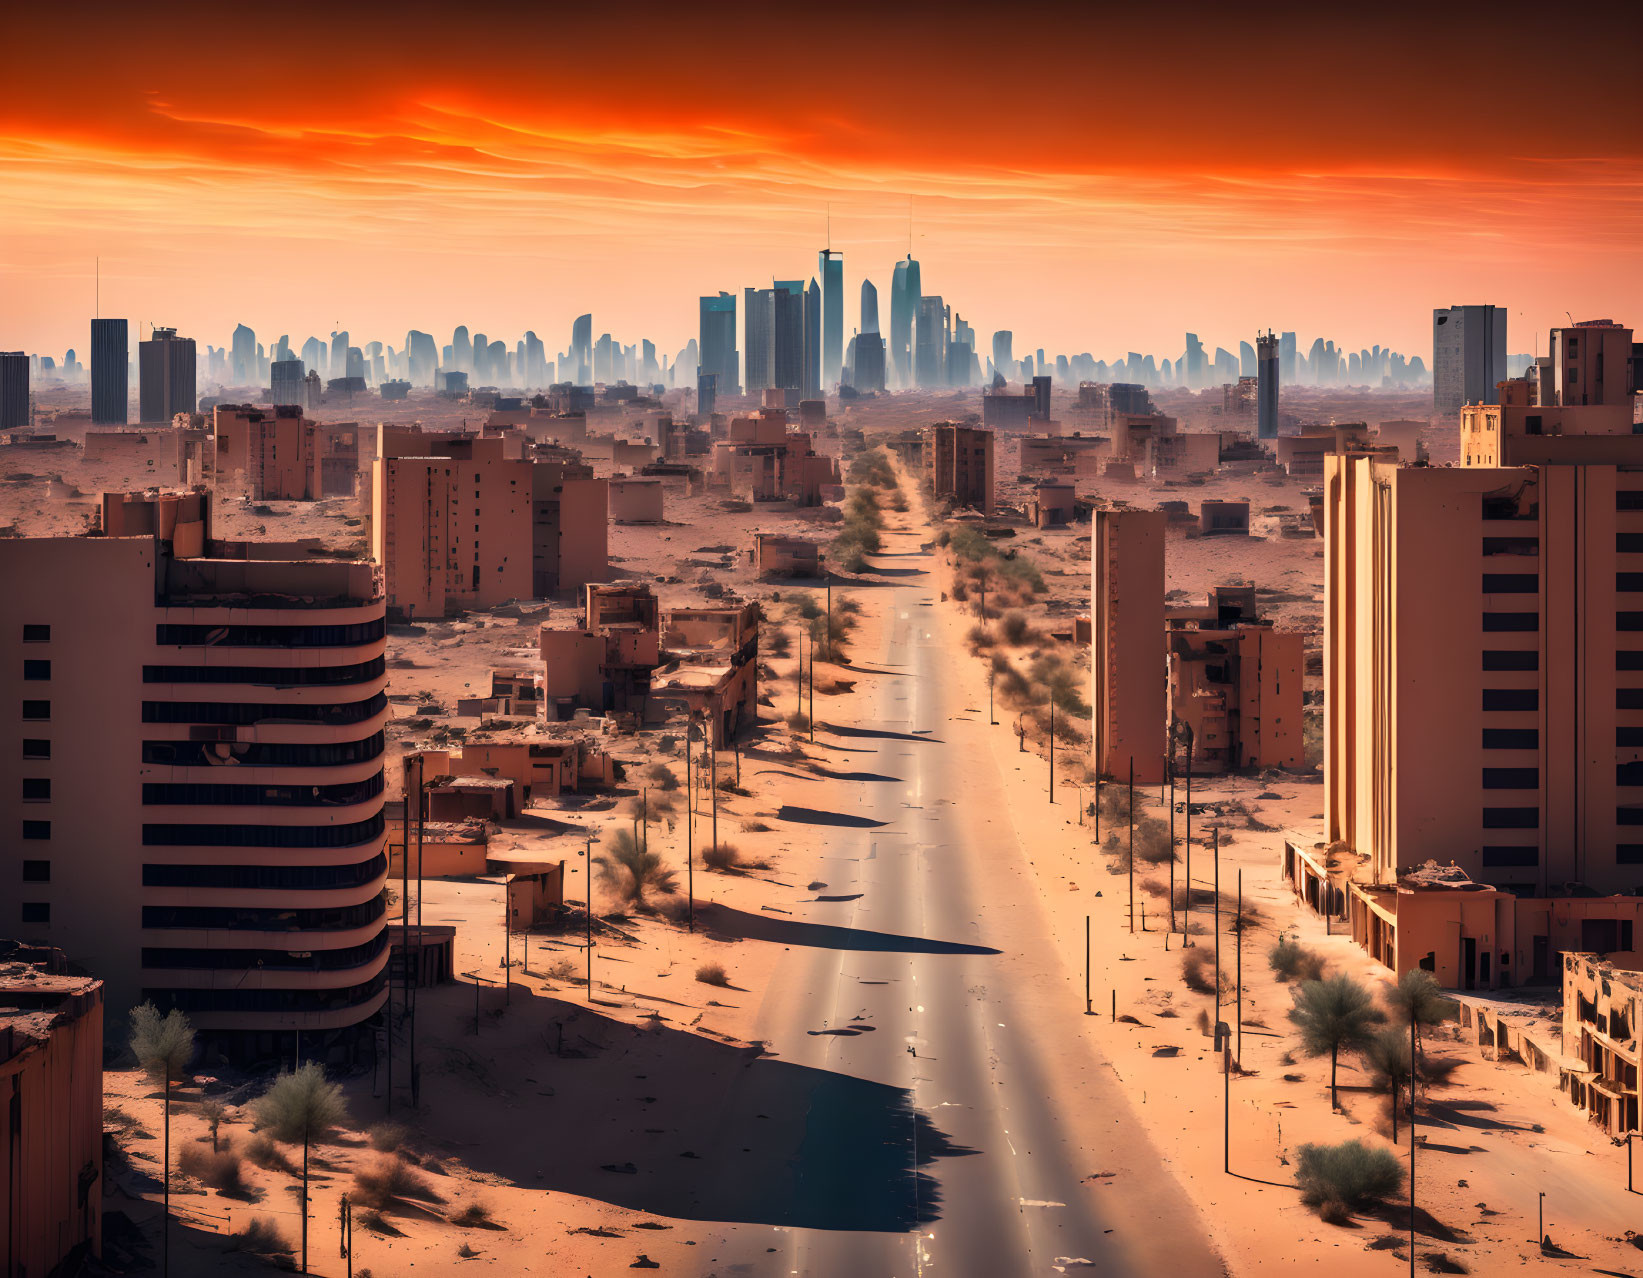 Desolate urban landscape with abandoned buildings and dusty road under dramatic reddish sky